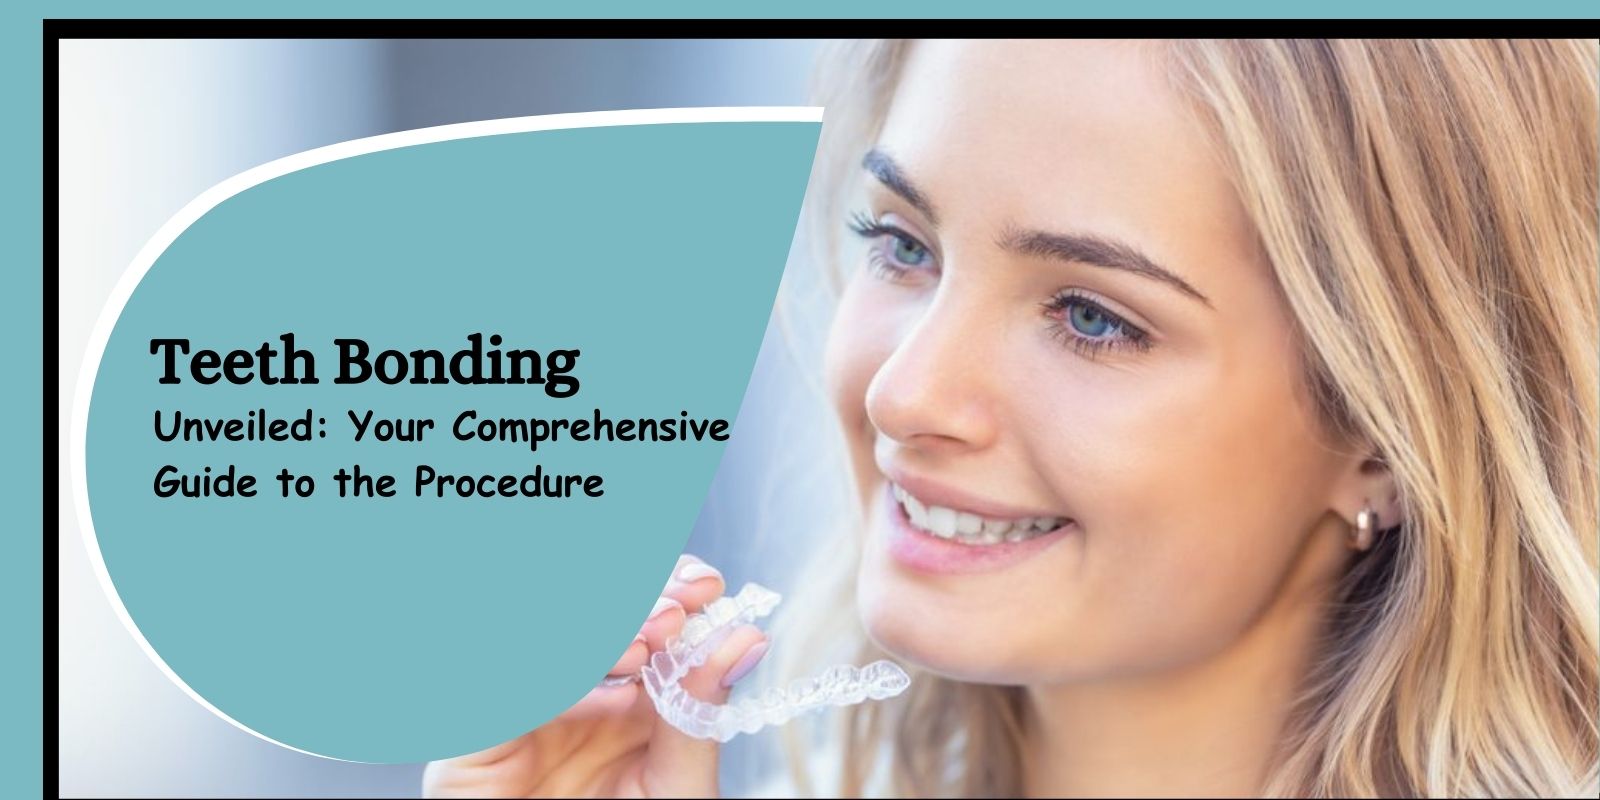 Teeth Bonding Unveiled Your Comprehensive Guide to the Procedure